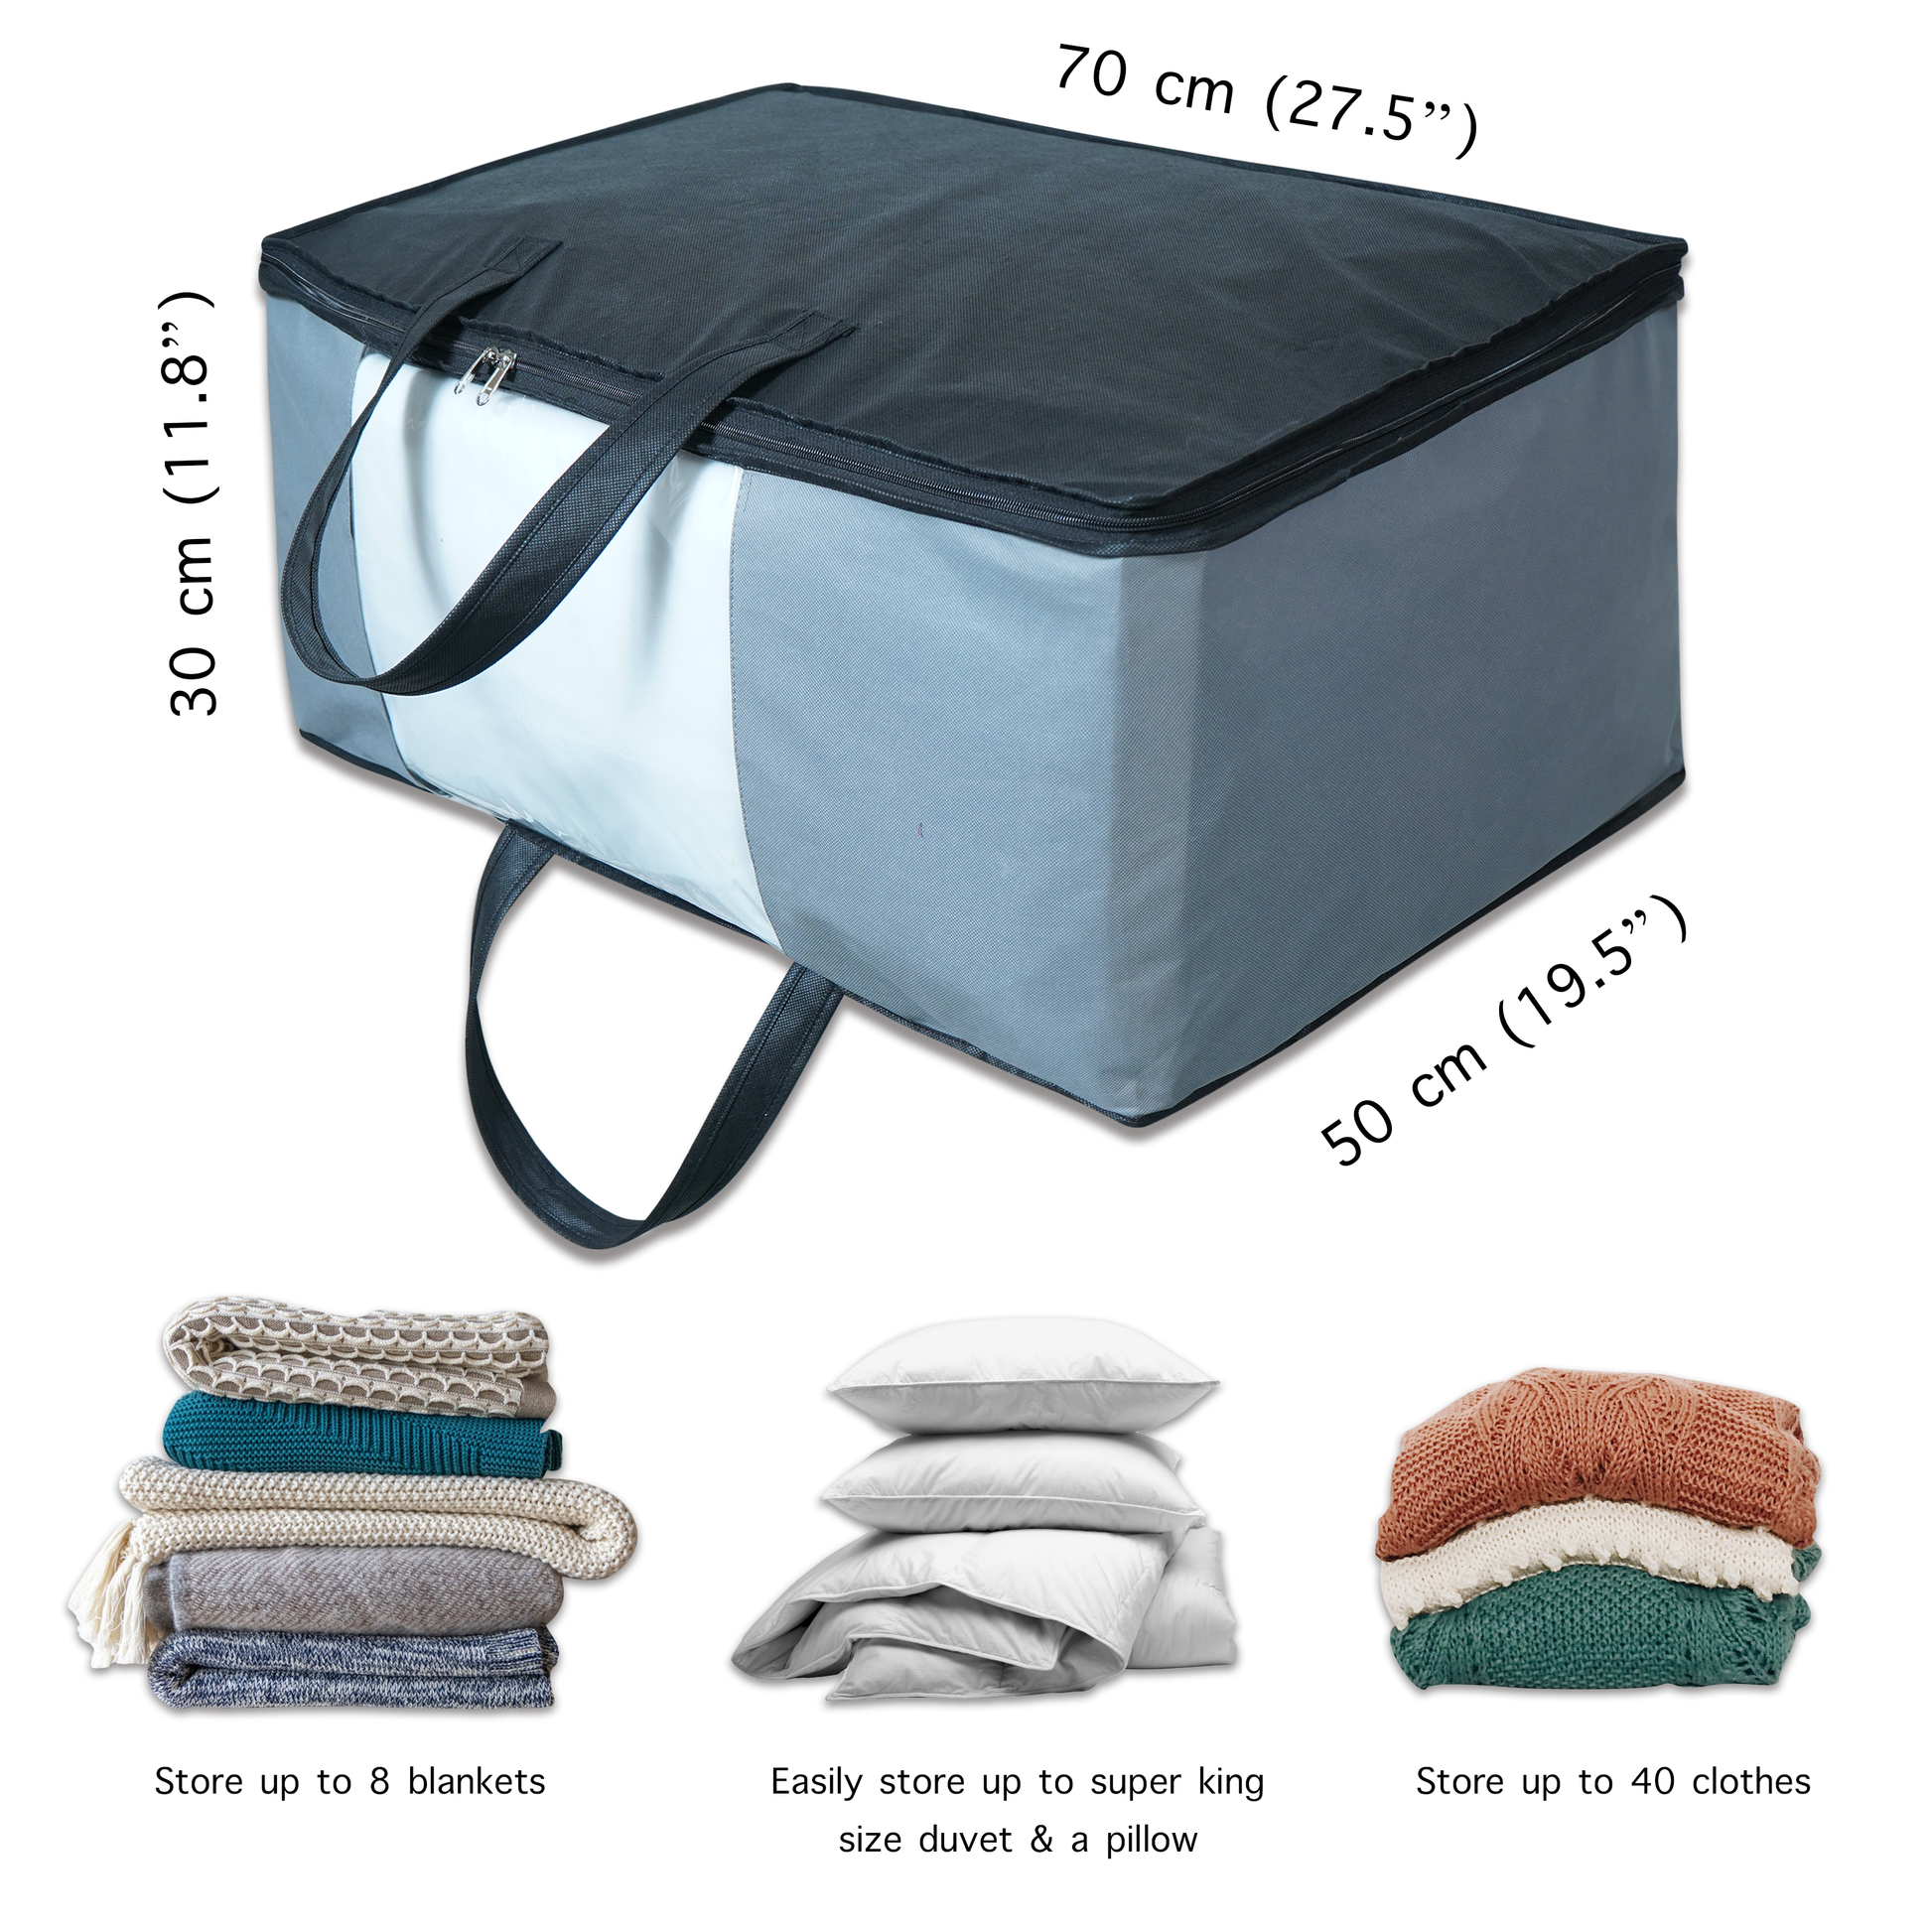 Expandable Clothes Storage Bags [70L Capacity] 1 Pk - 2 Adjustable Sizes  for Compact Under Bed Storage or Expands to Large Clothing Storage Bag